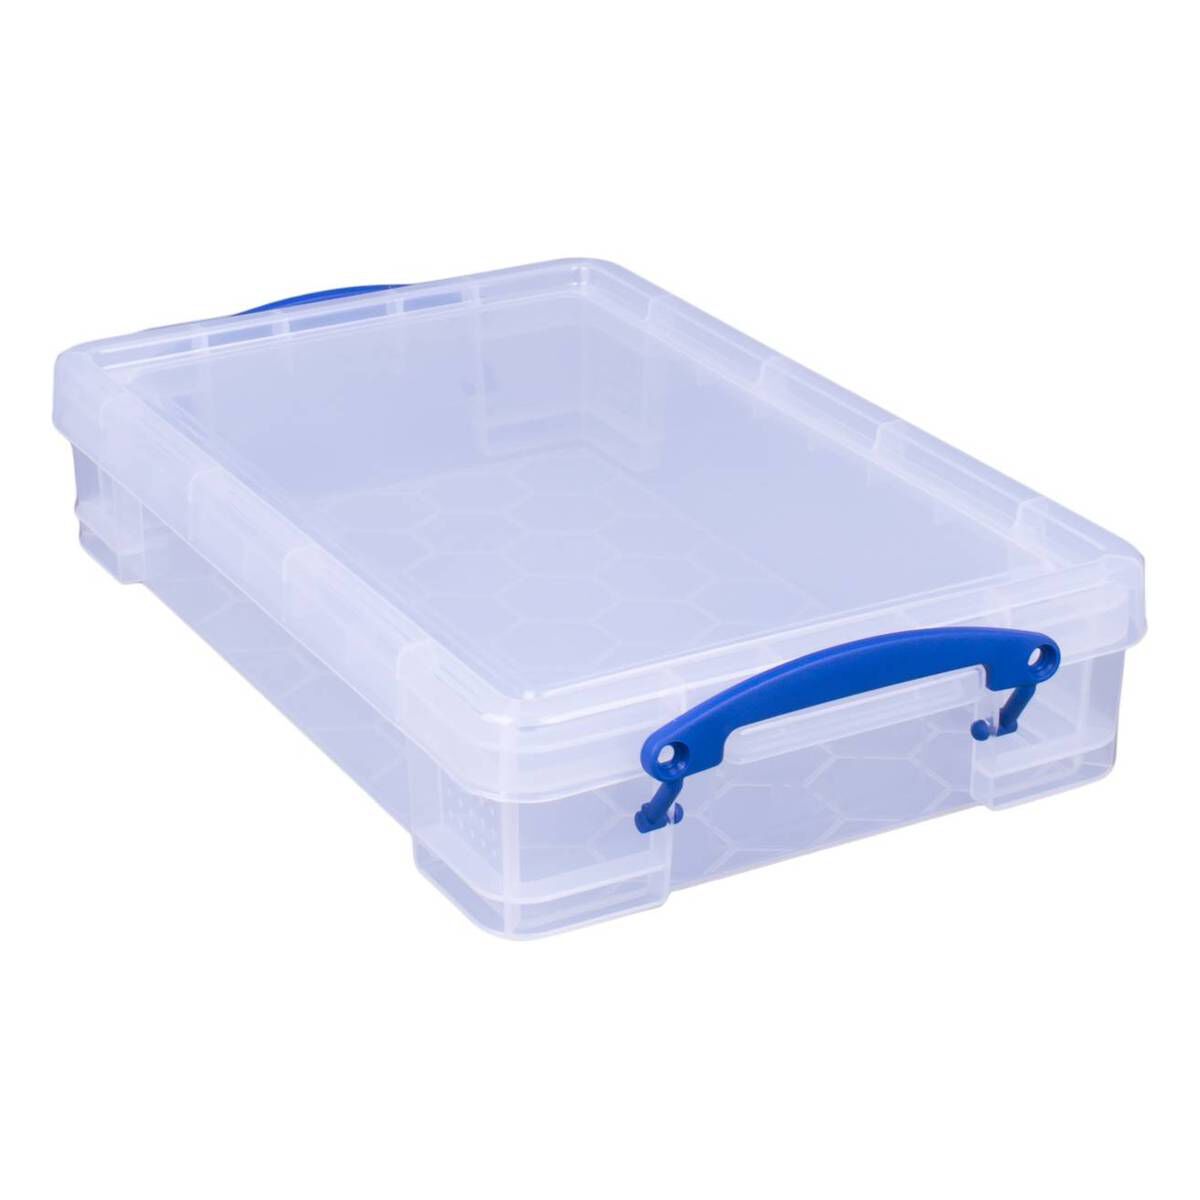 Uumitty 4 L Clear Plastic Storage Box 6 Packs Small Container with Handles 